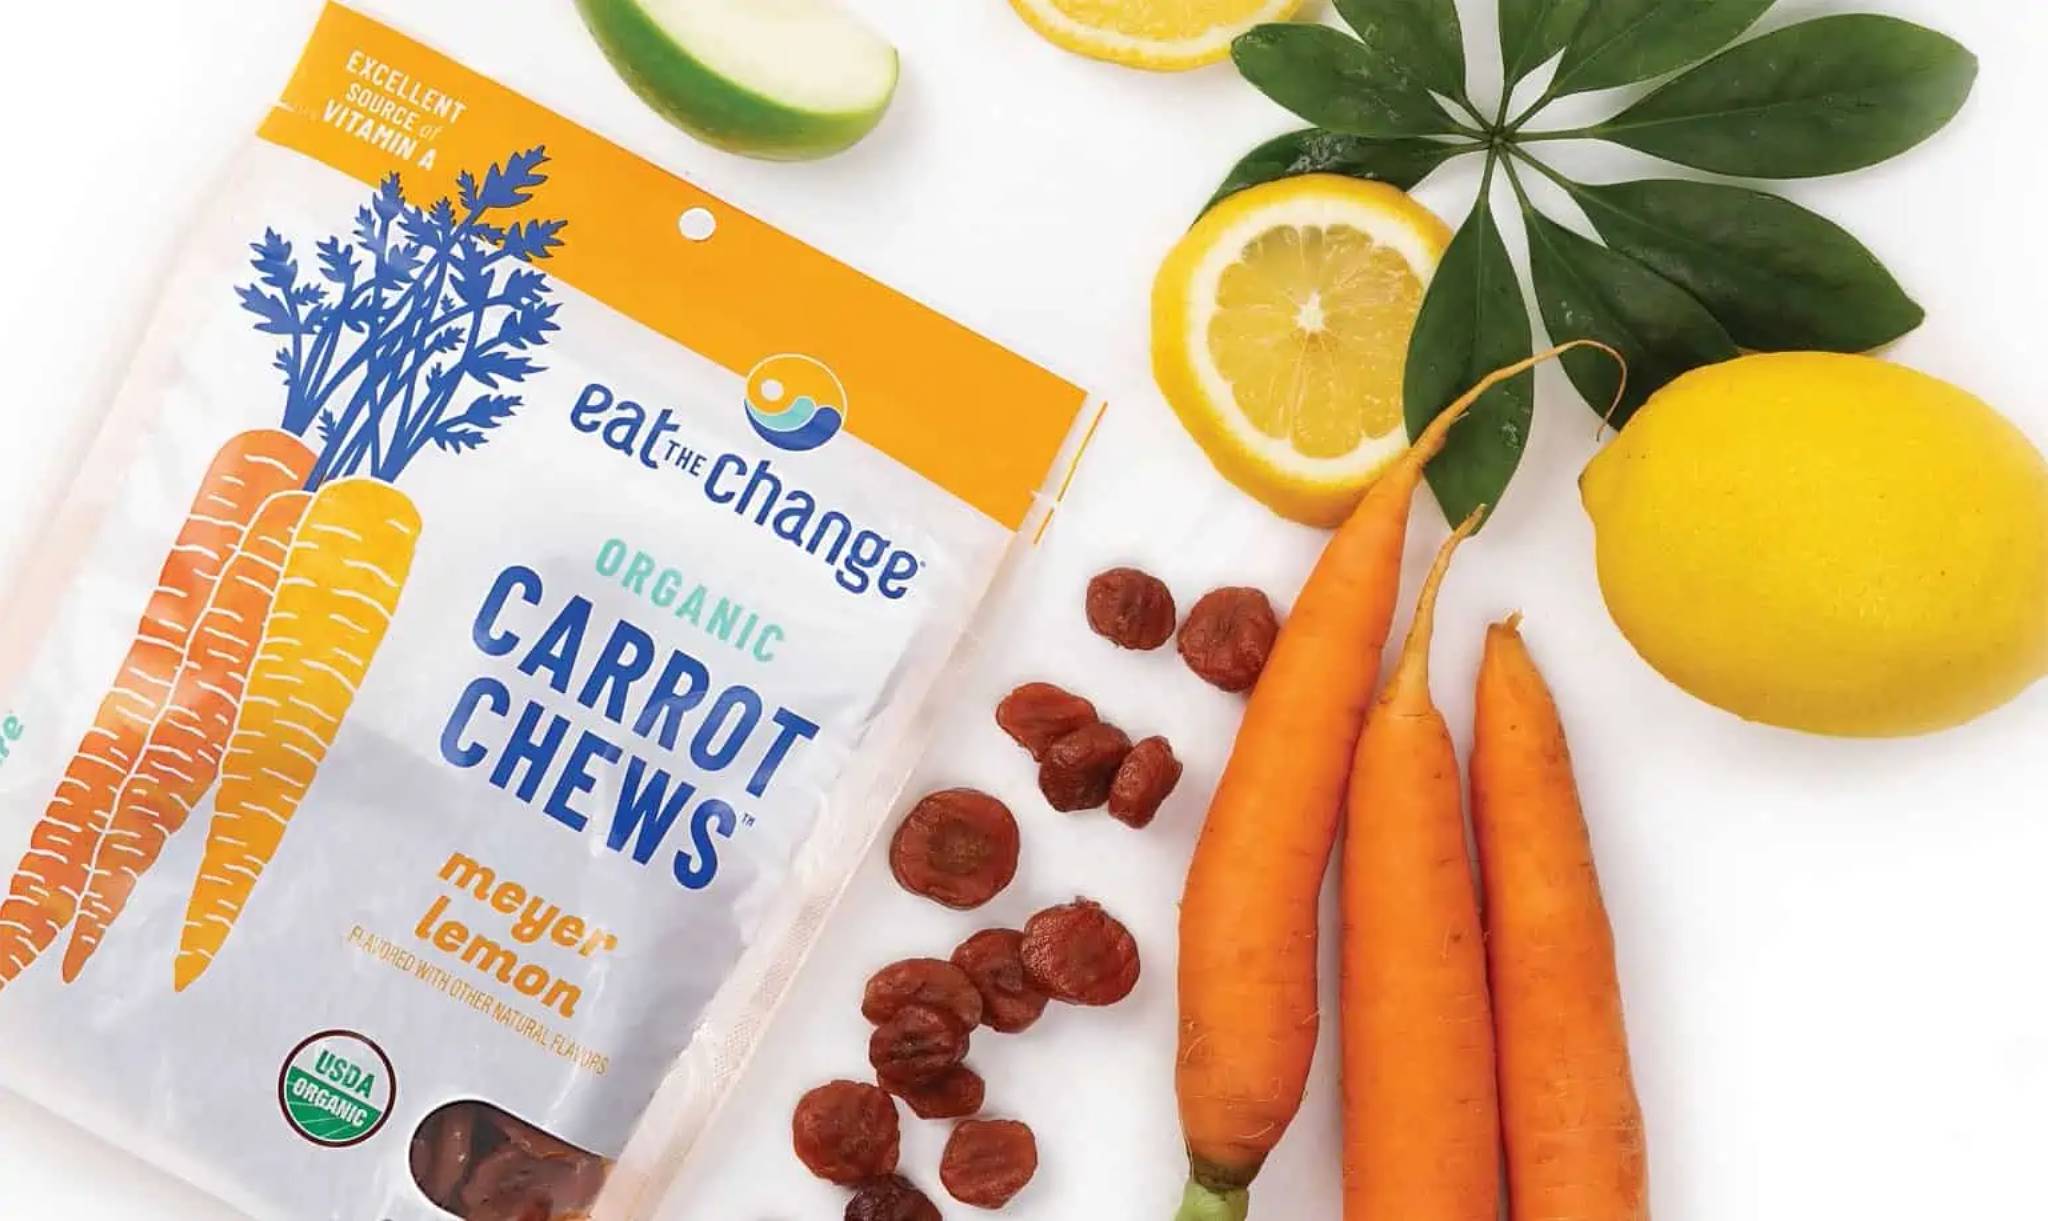 Eat the Change makes convenient veg snacks for adults